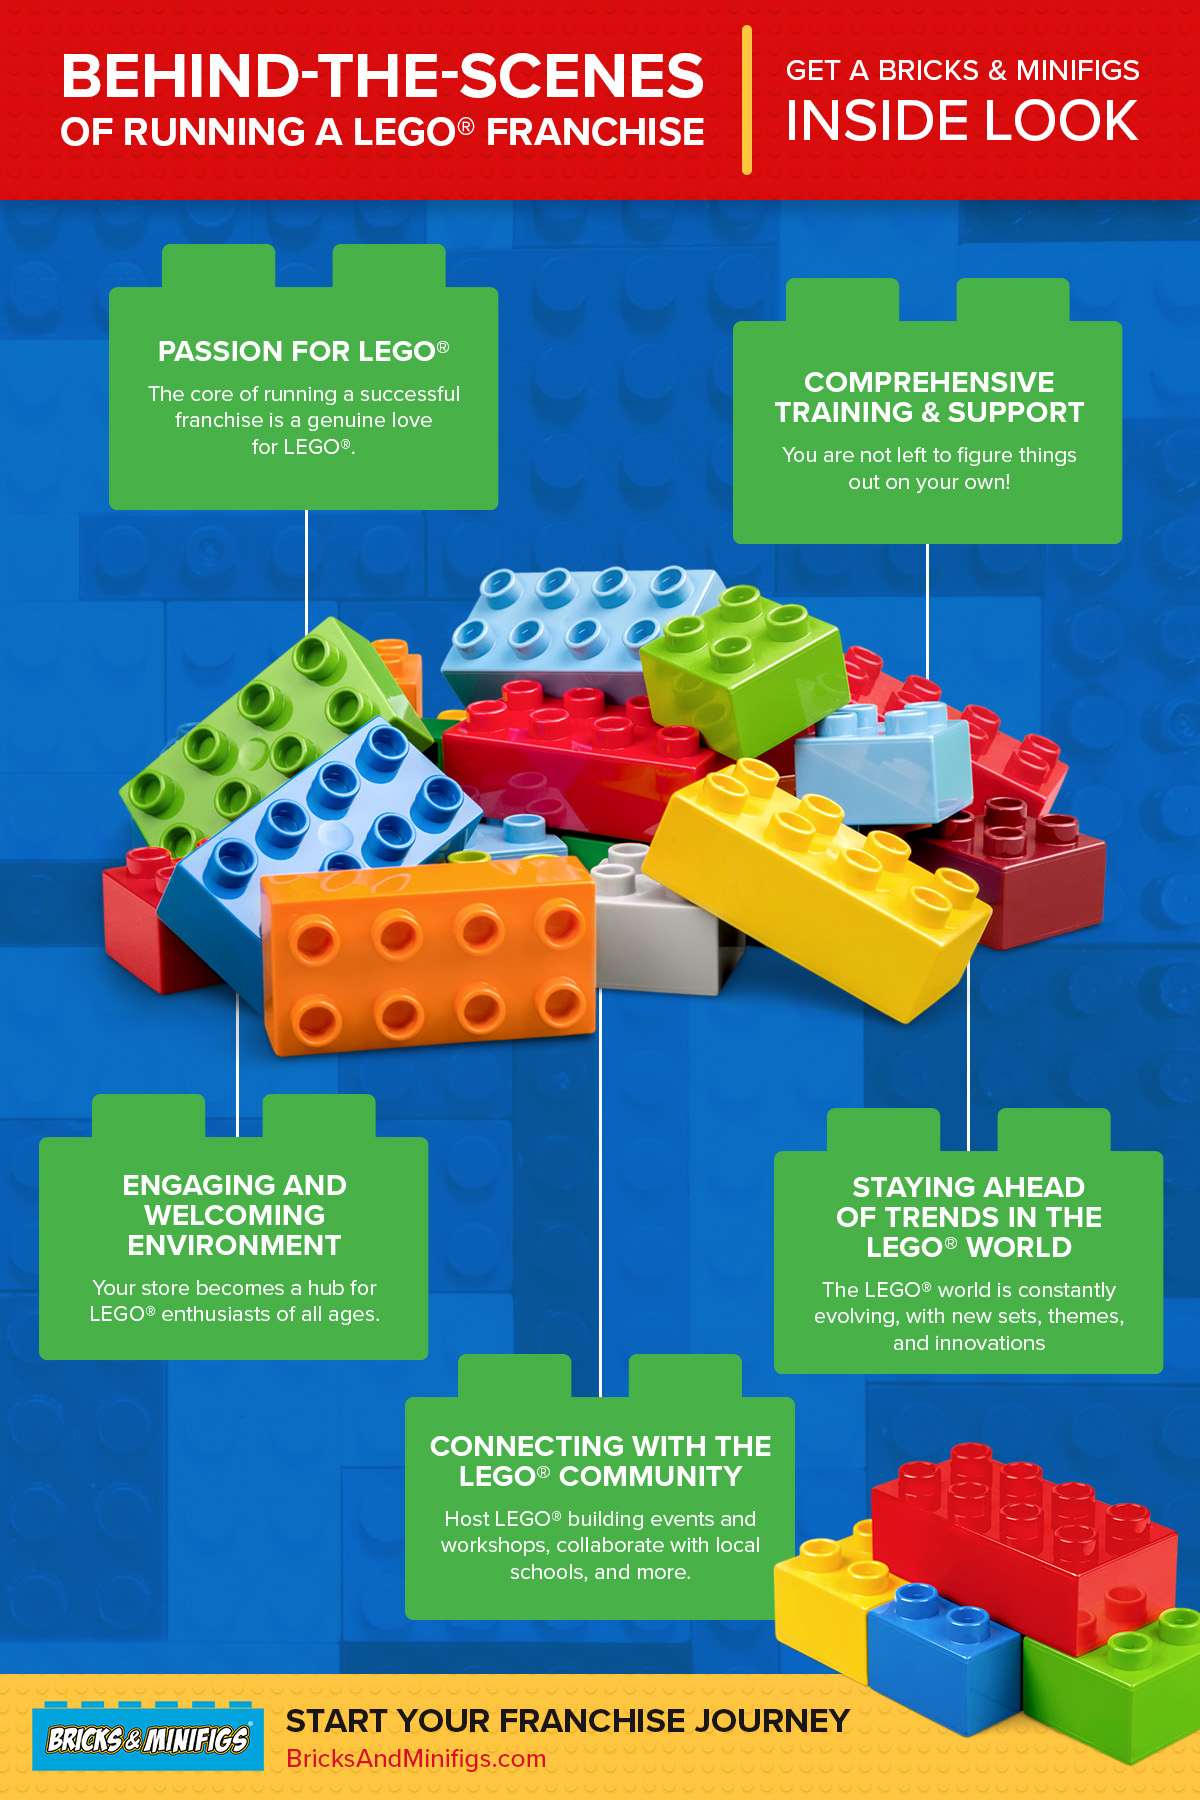 Behind-The-Scenes of Running a LEGO Franchise Infographic